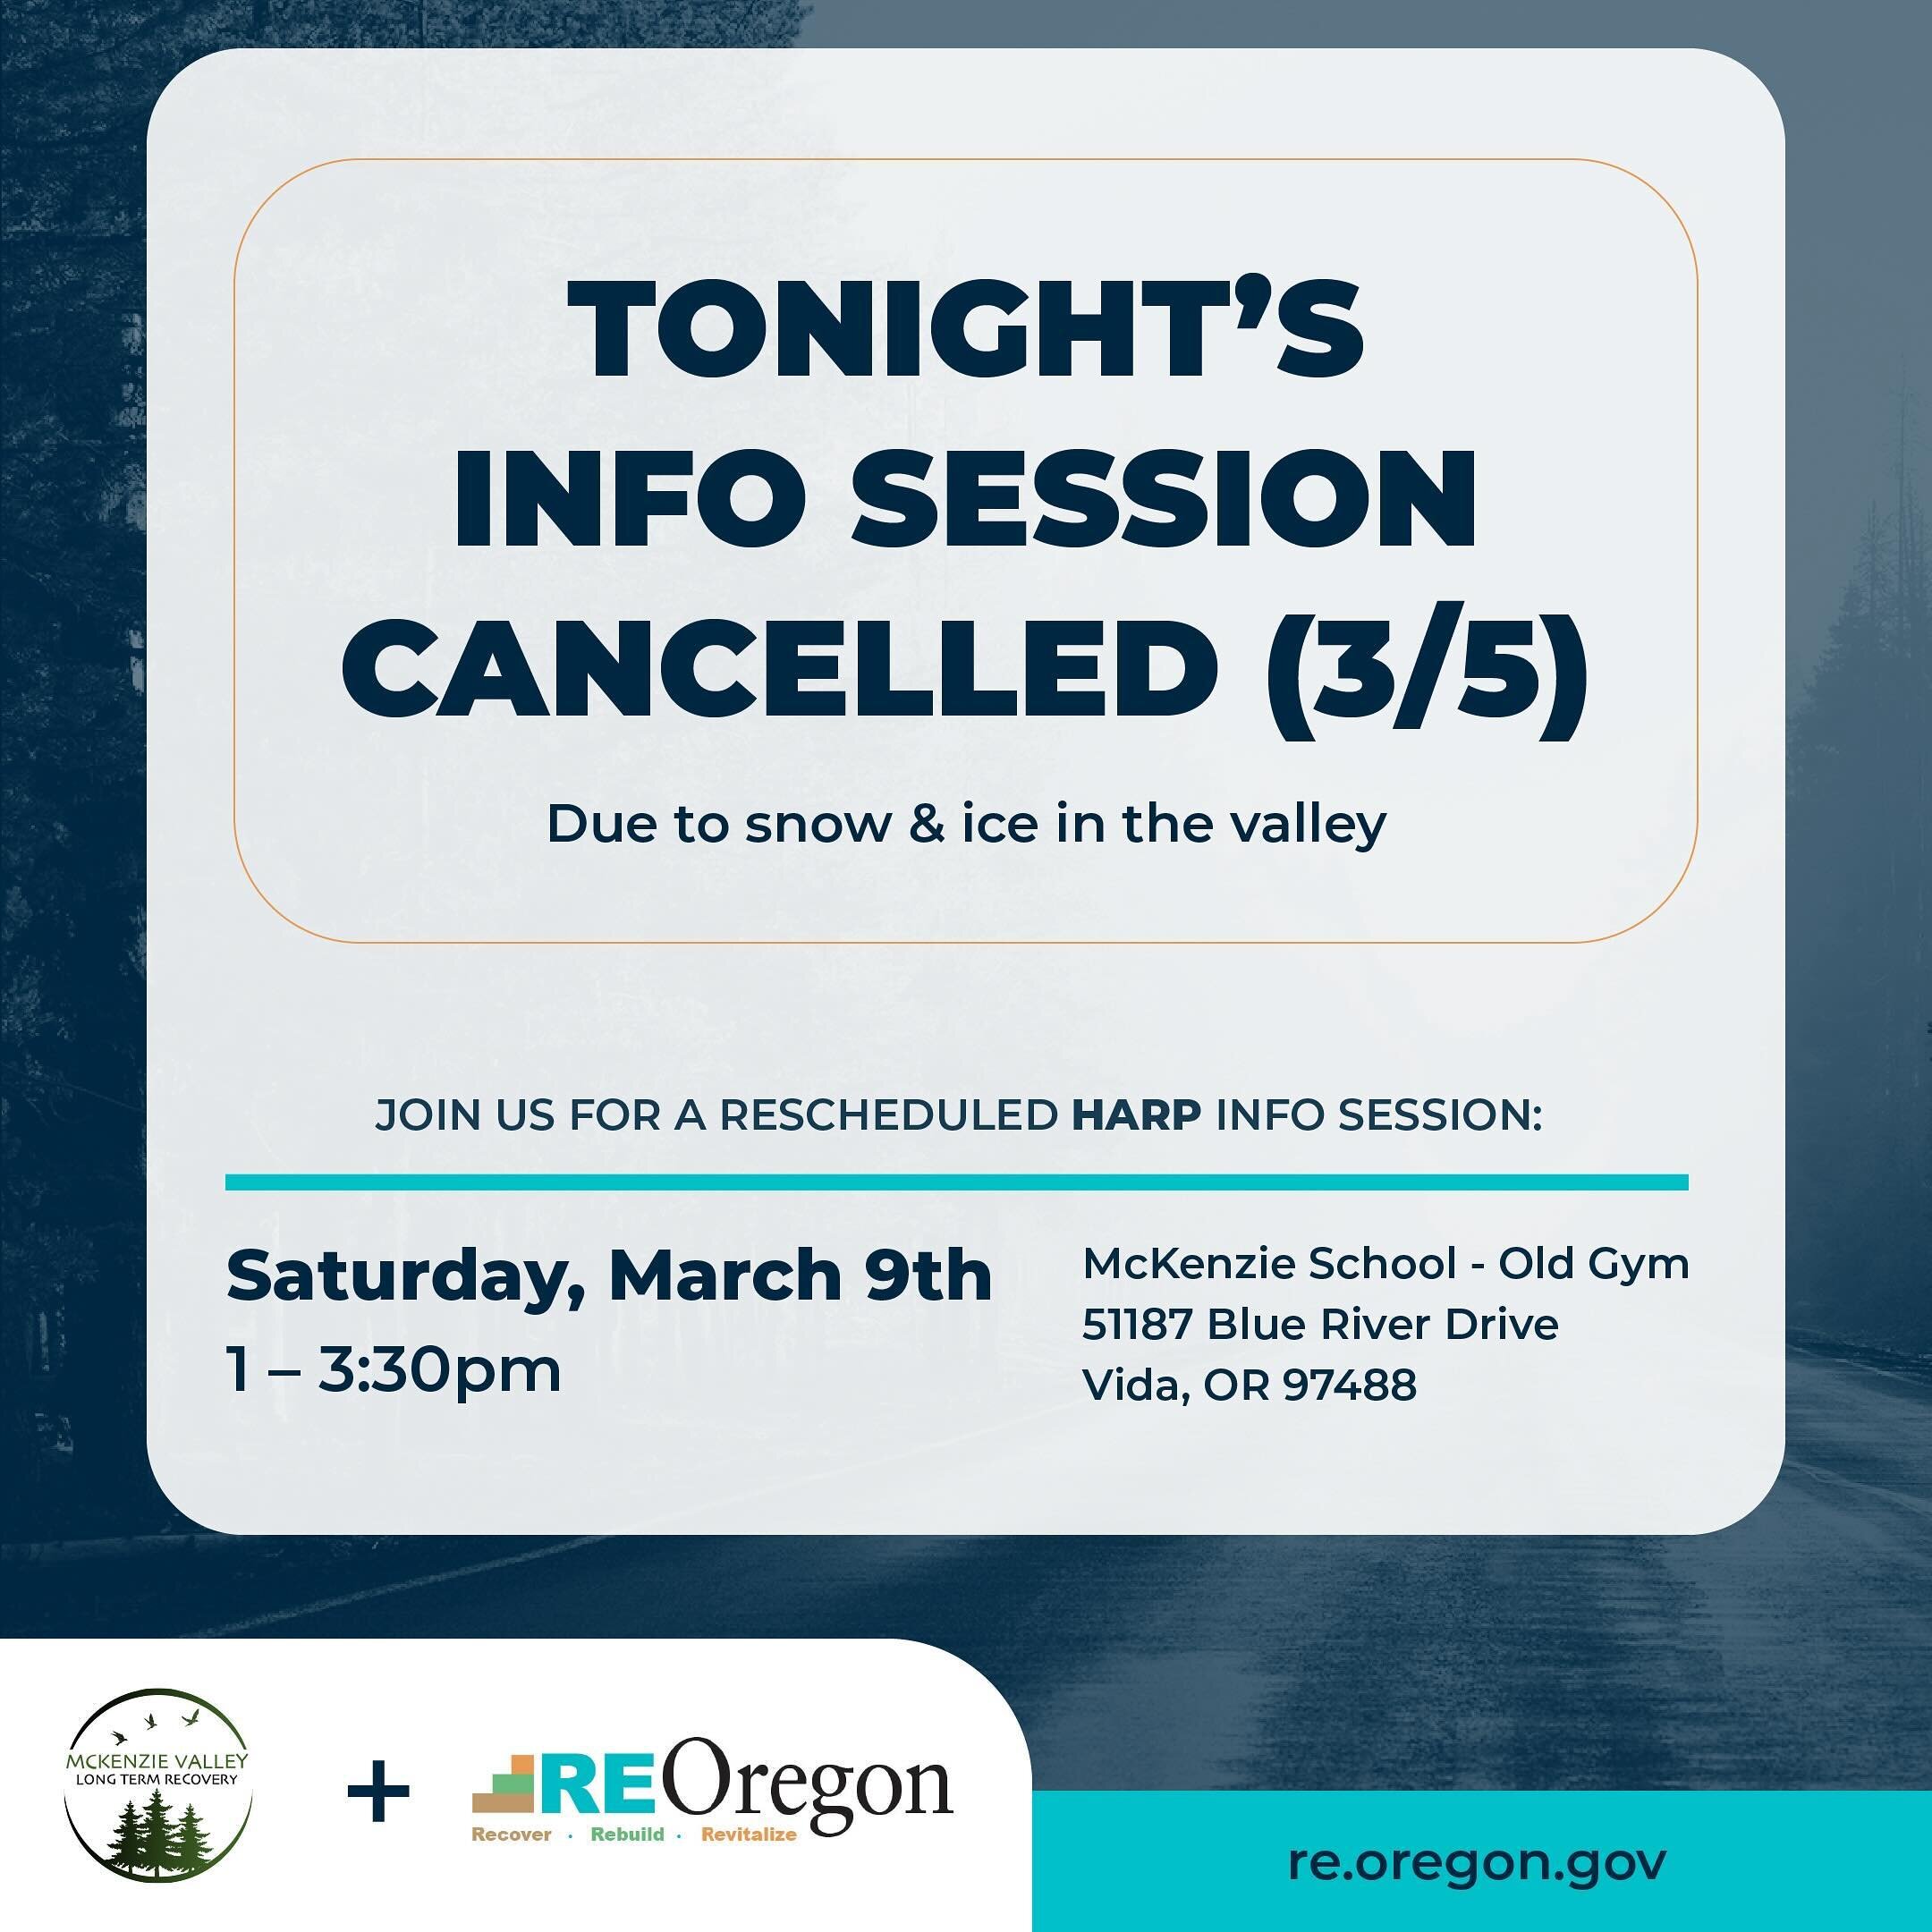 UPDATE:  Due to snow and ice in the valley, tonight&rsquo;s informational session is cancelled. Please join us this Saturday, March 9th (1-3:30pm) for invaluable insights about ReOregon Homeowner Assistance and Reconstruction Program (HARP), launchin